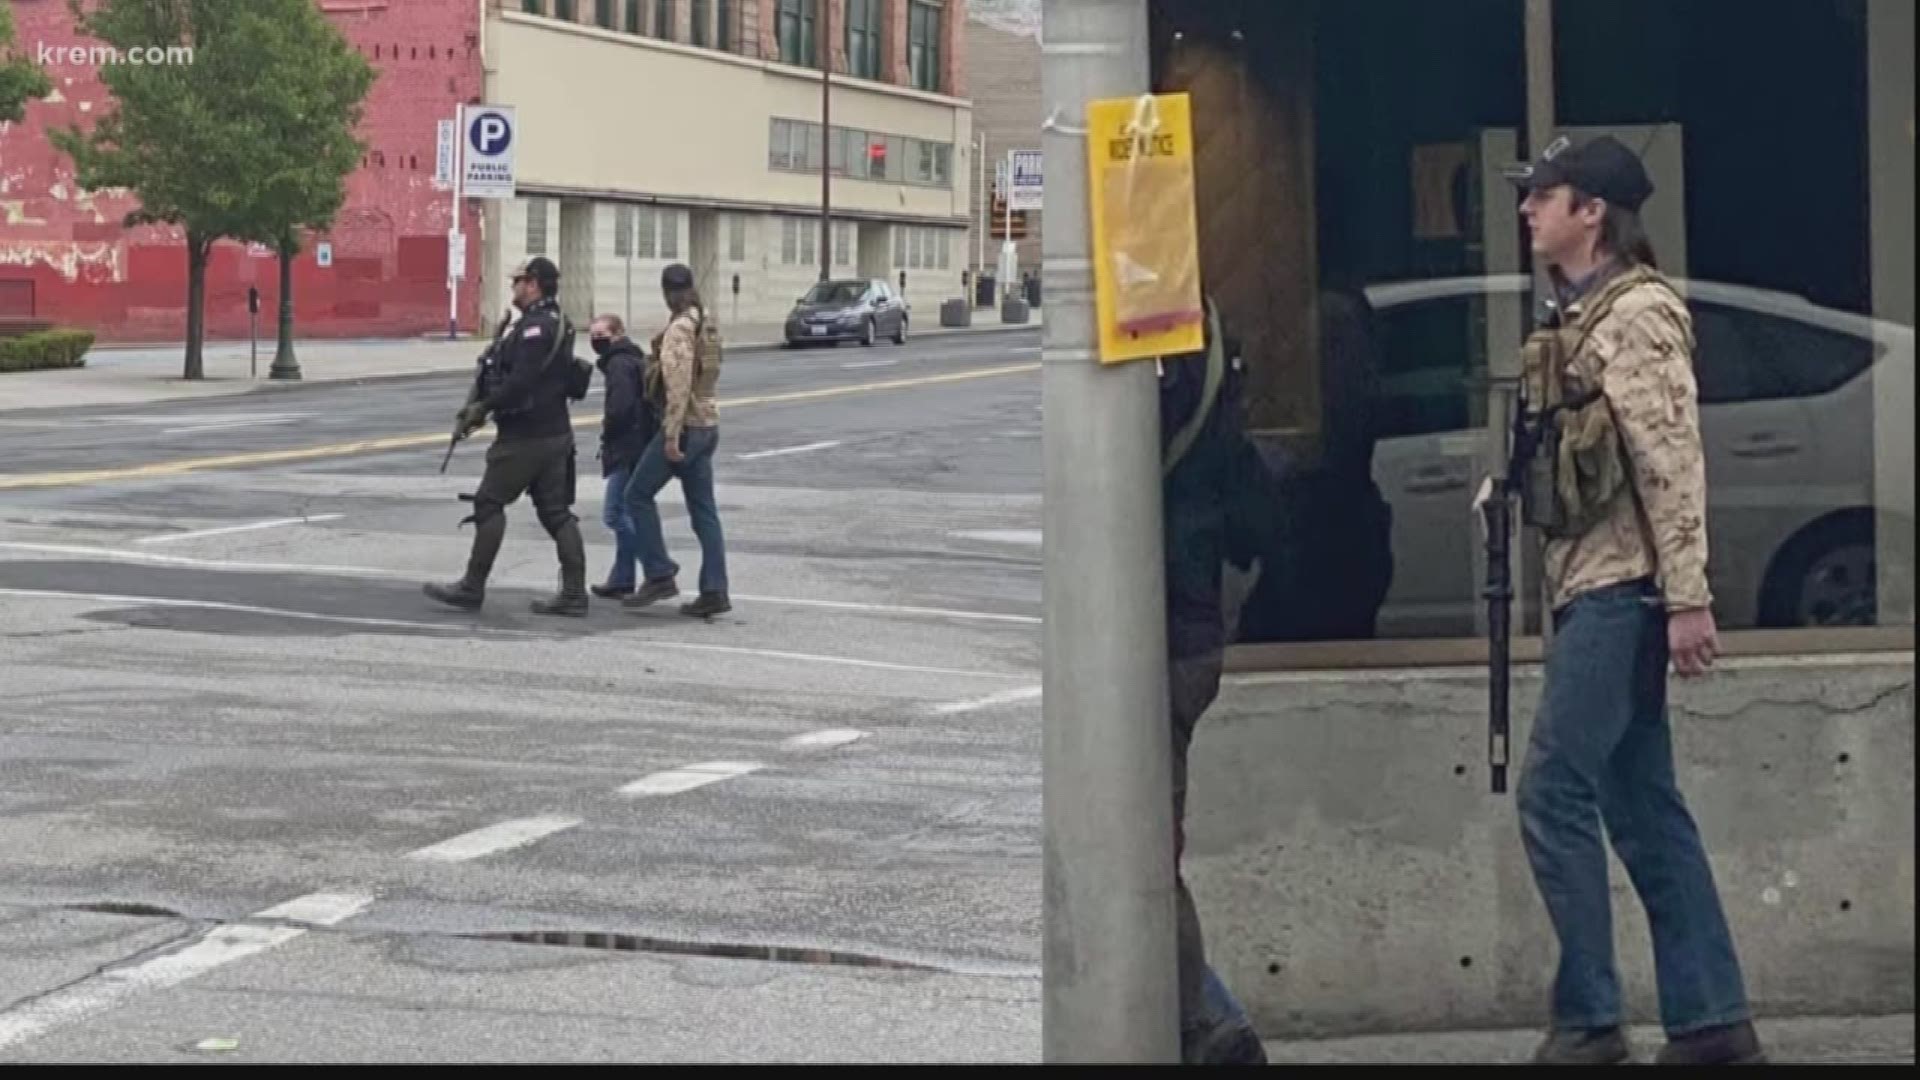 Businesses are speaking out against armed militia downtown. Spokane police say it's legal, but Washington law is less clear.